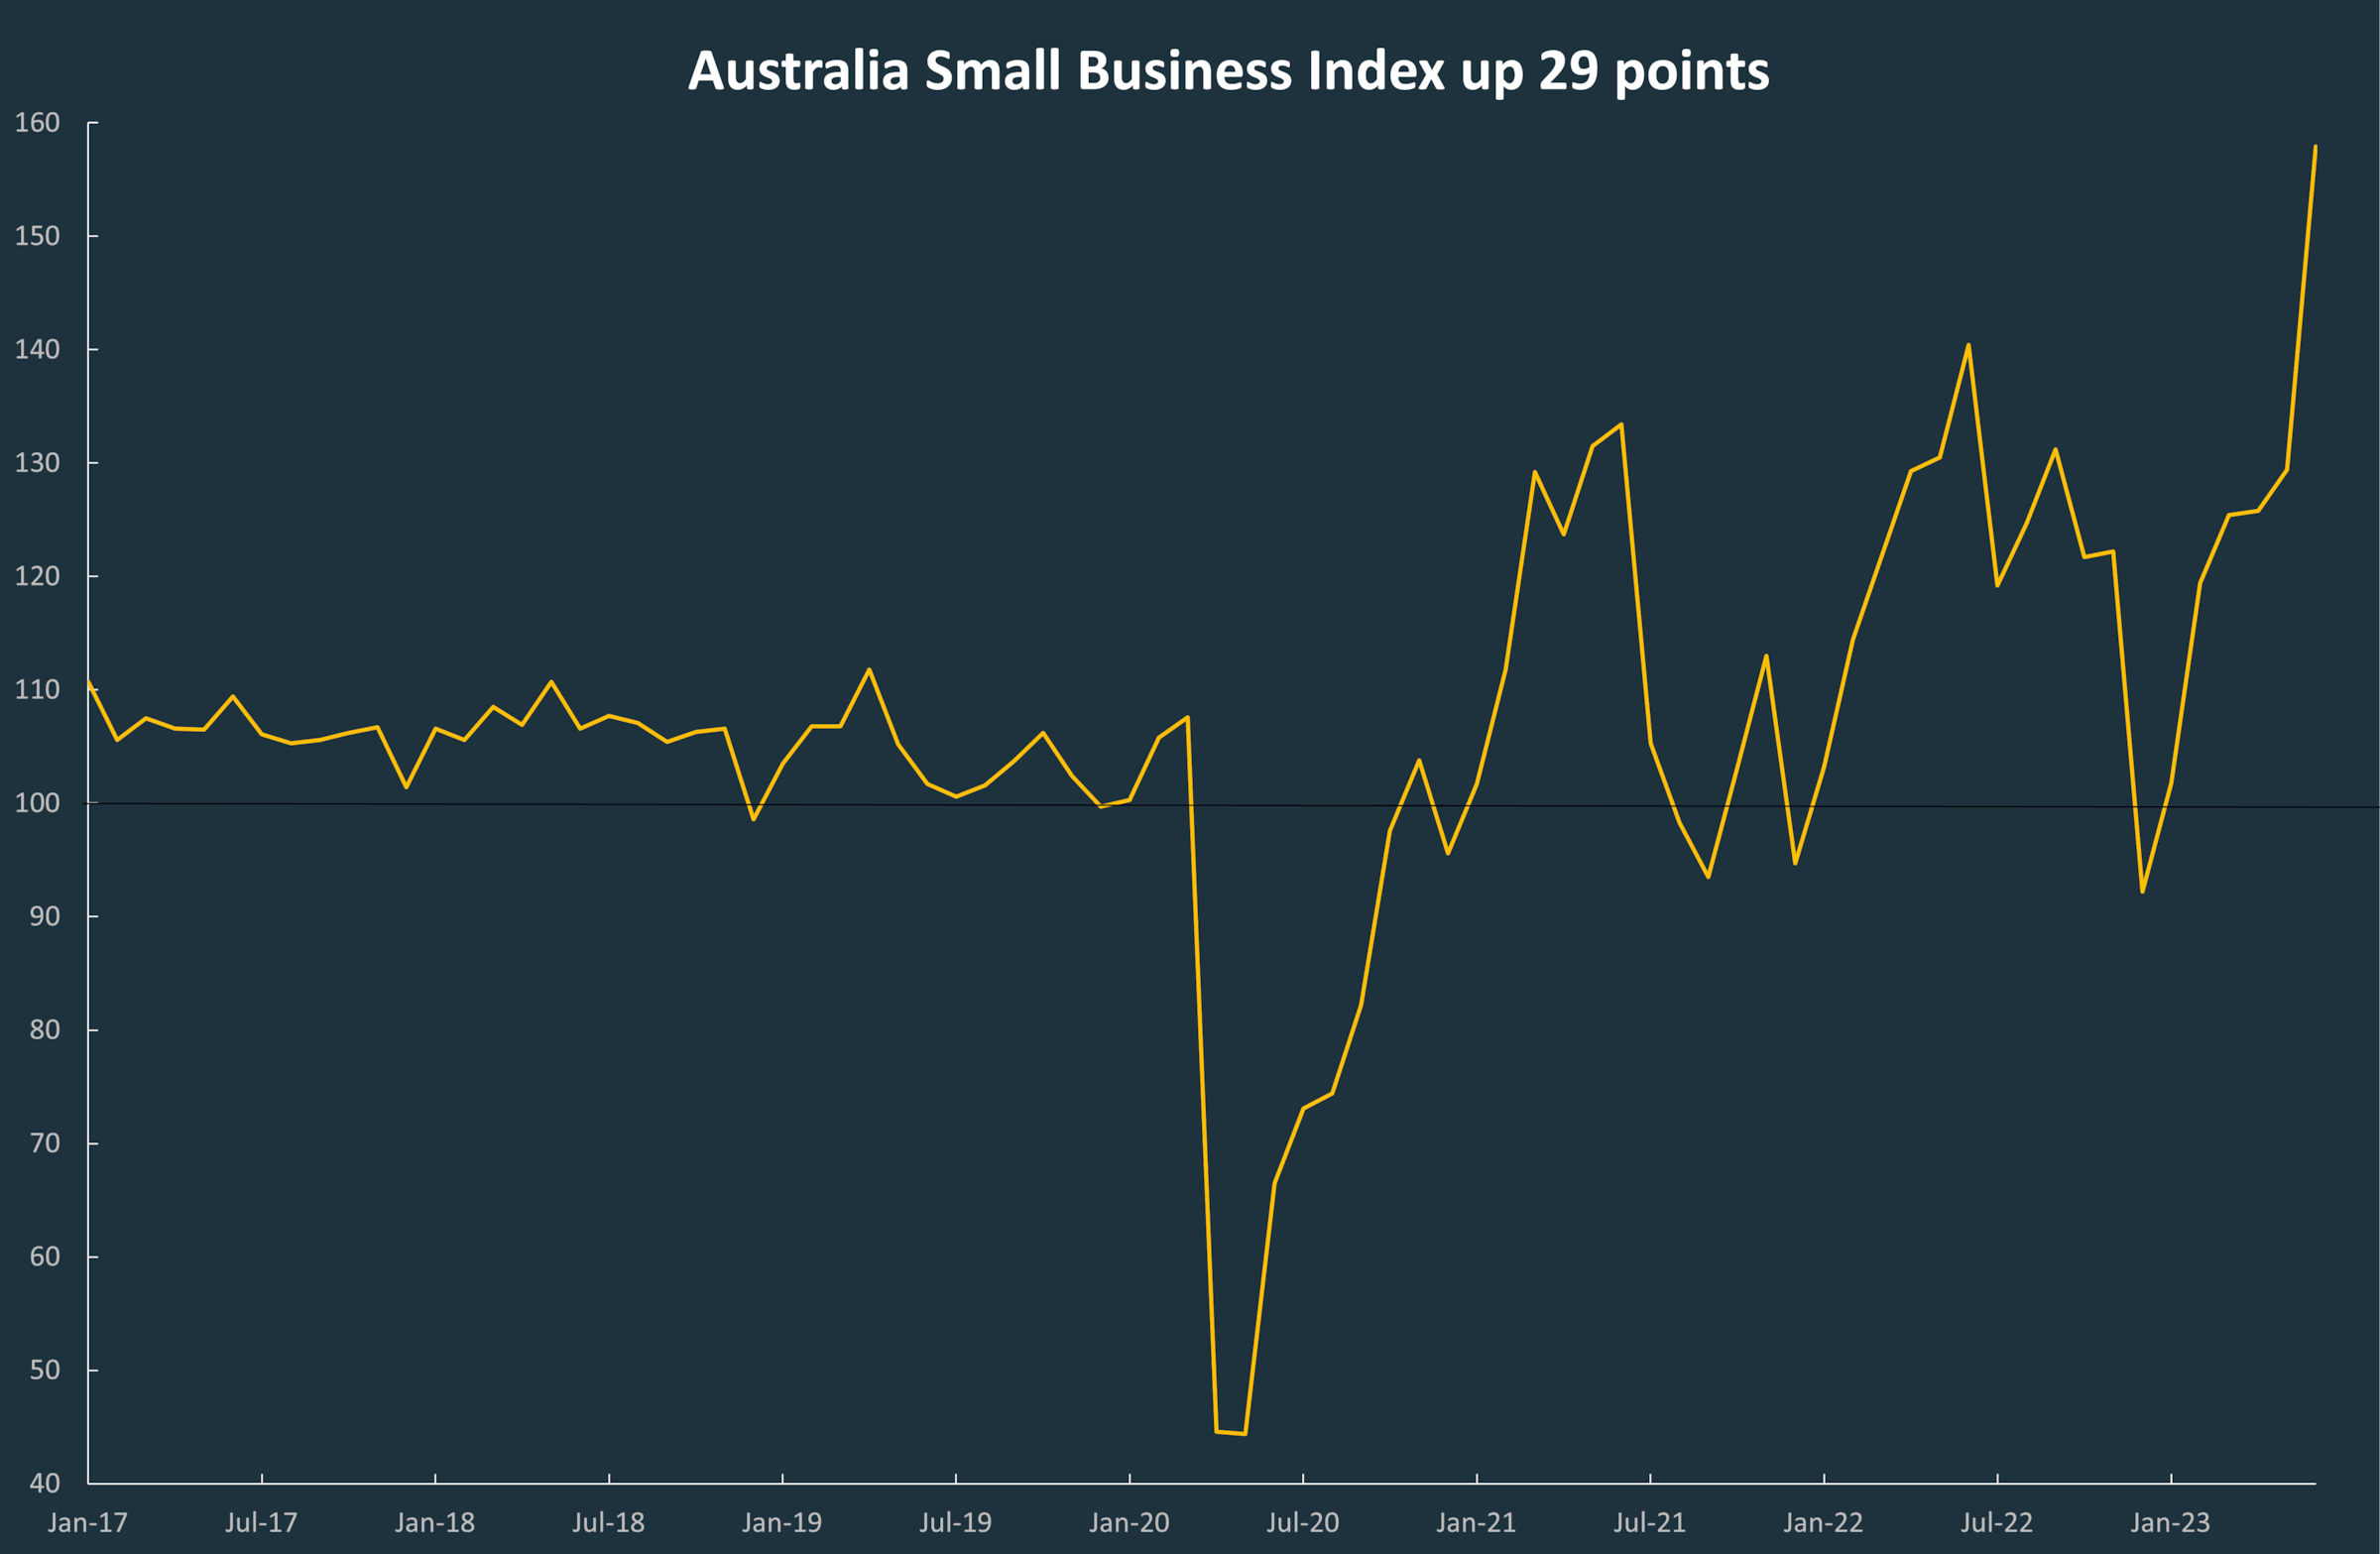 A line graph showing the ups and downs in the Australian Small Business Index since January 2017.